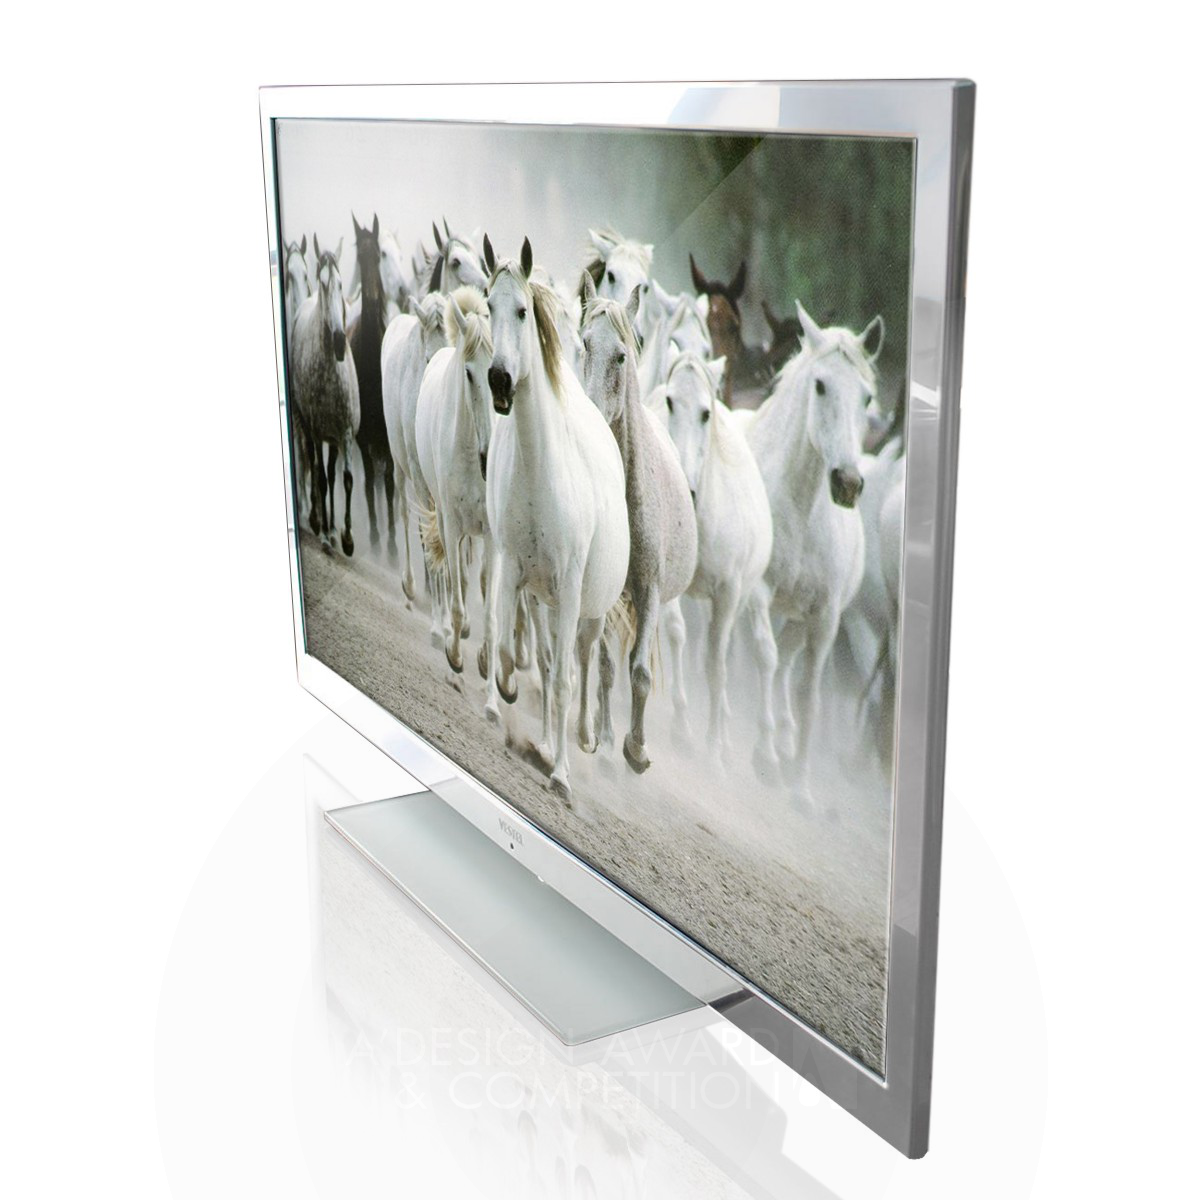 V TV - 46120 <b>46&quot; LED TV supporting the HD broadcast.